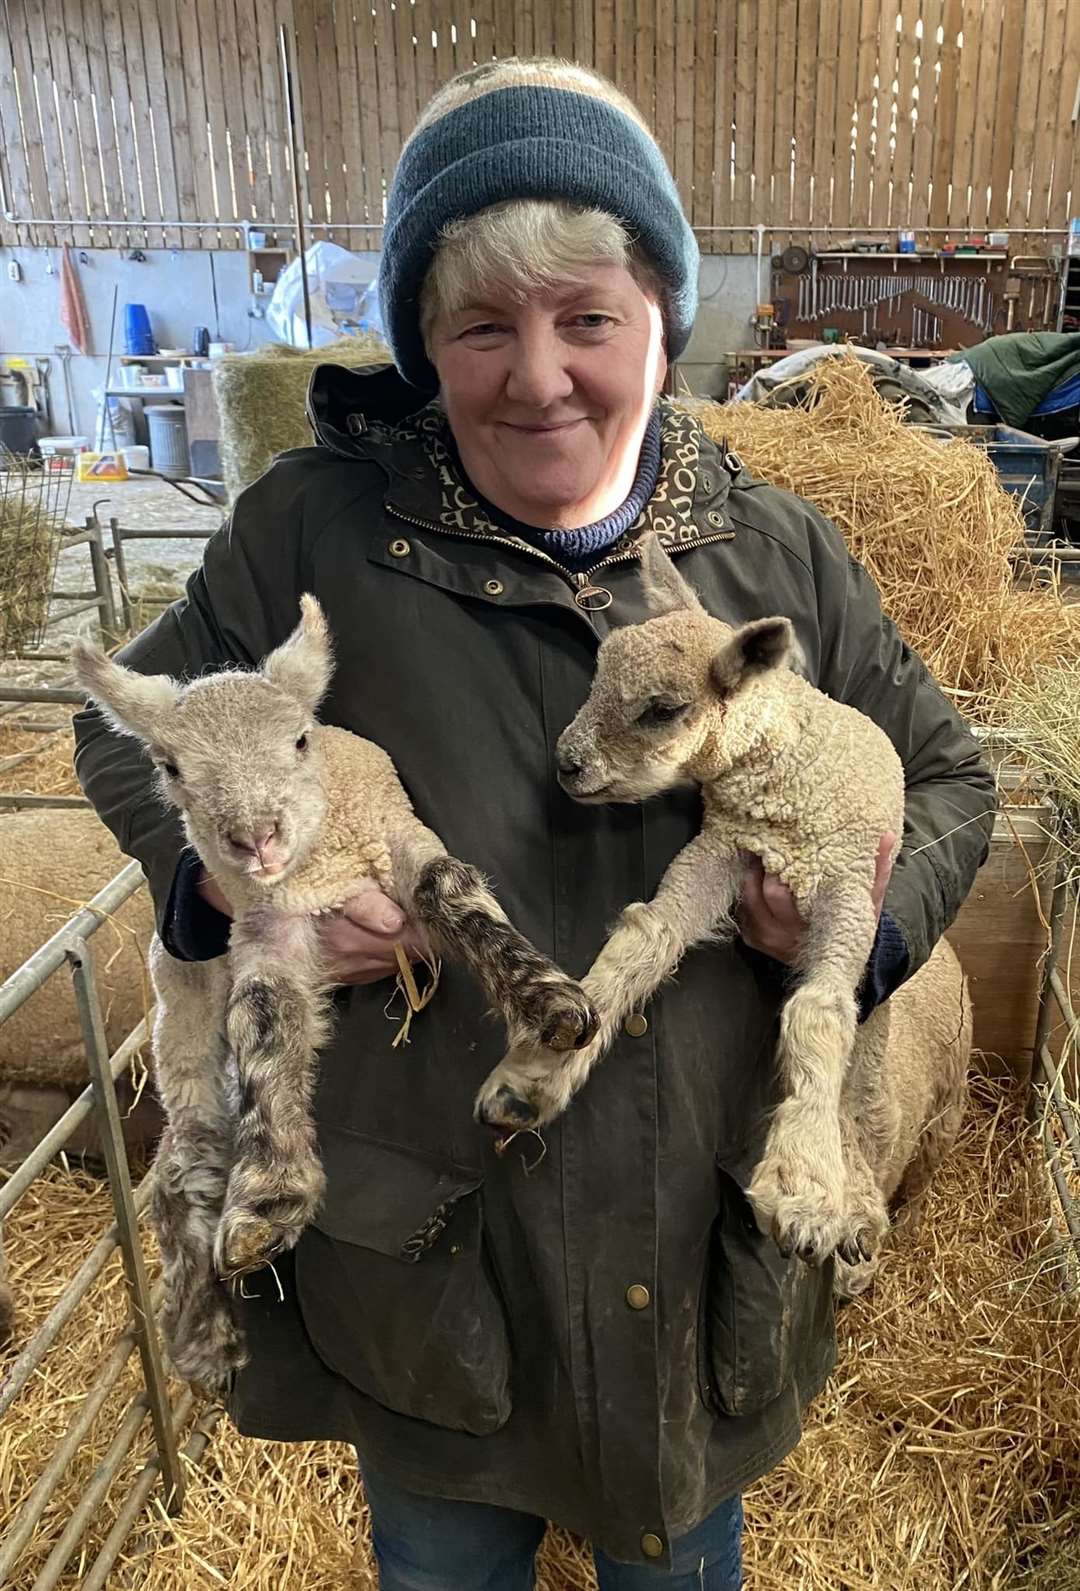 Lambing day at Lumsden